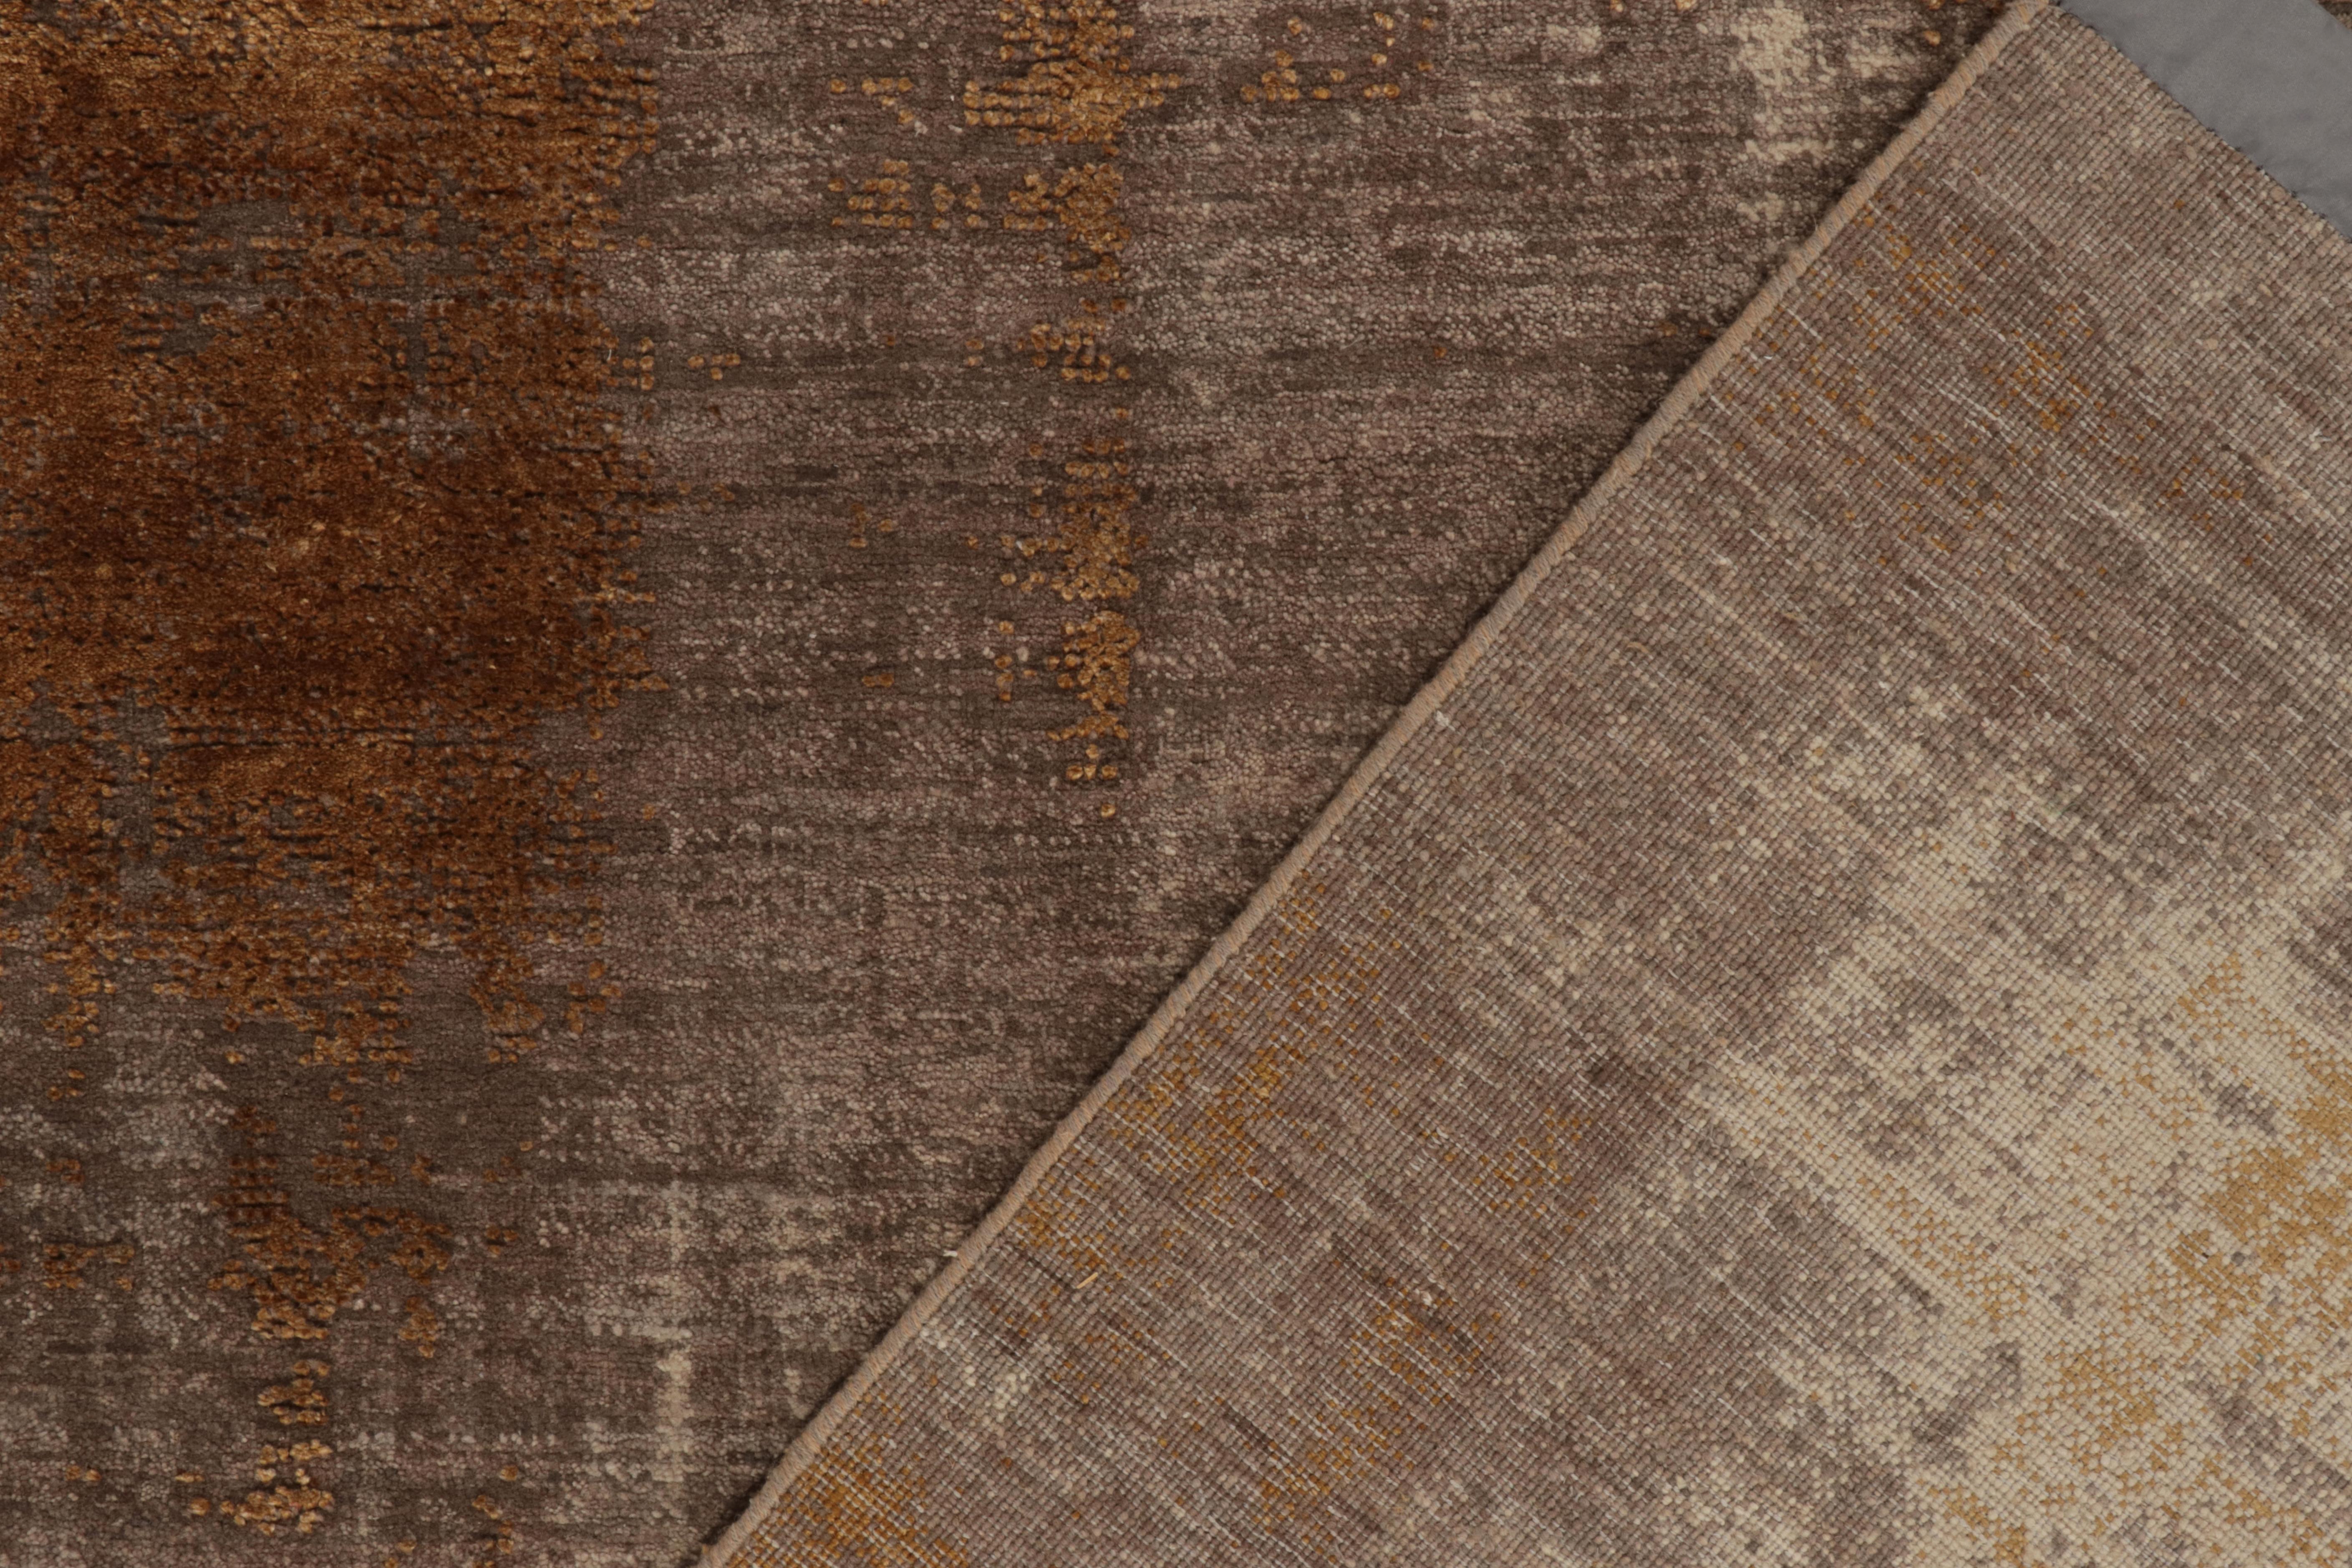 Contemporary Rug & Kilim’s Abstract Rug in Copper-Brown, Gold and Grey All over Pattern For Sale